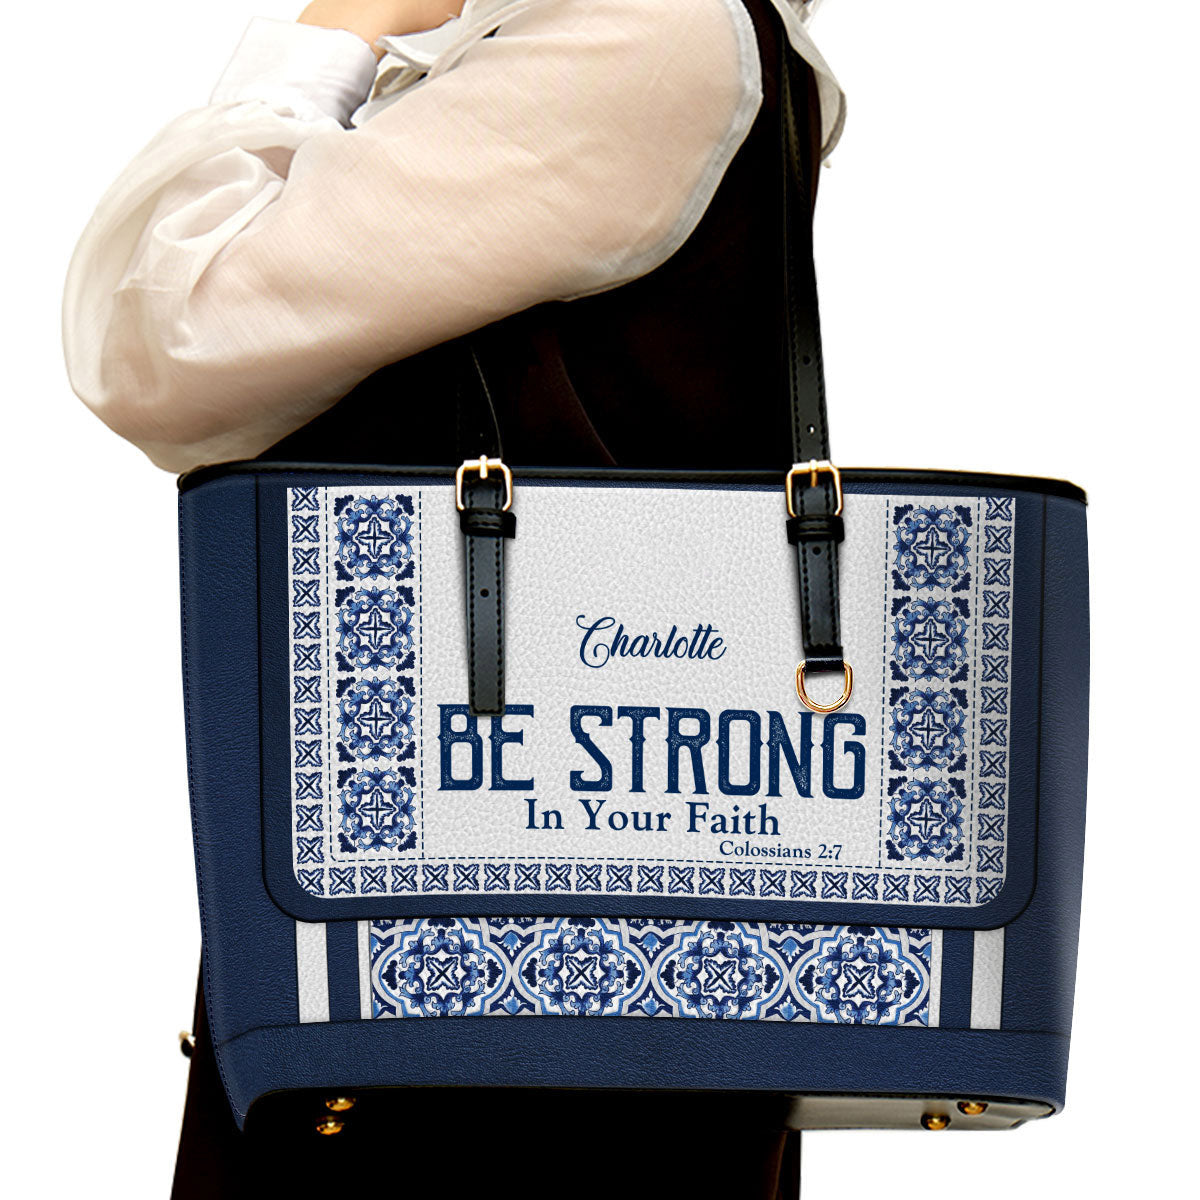 Be Strong In Your Faith Personalized Large Leather Tote Bag - Christian Gifts For Women